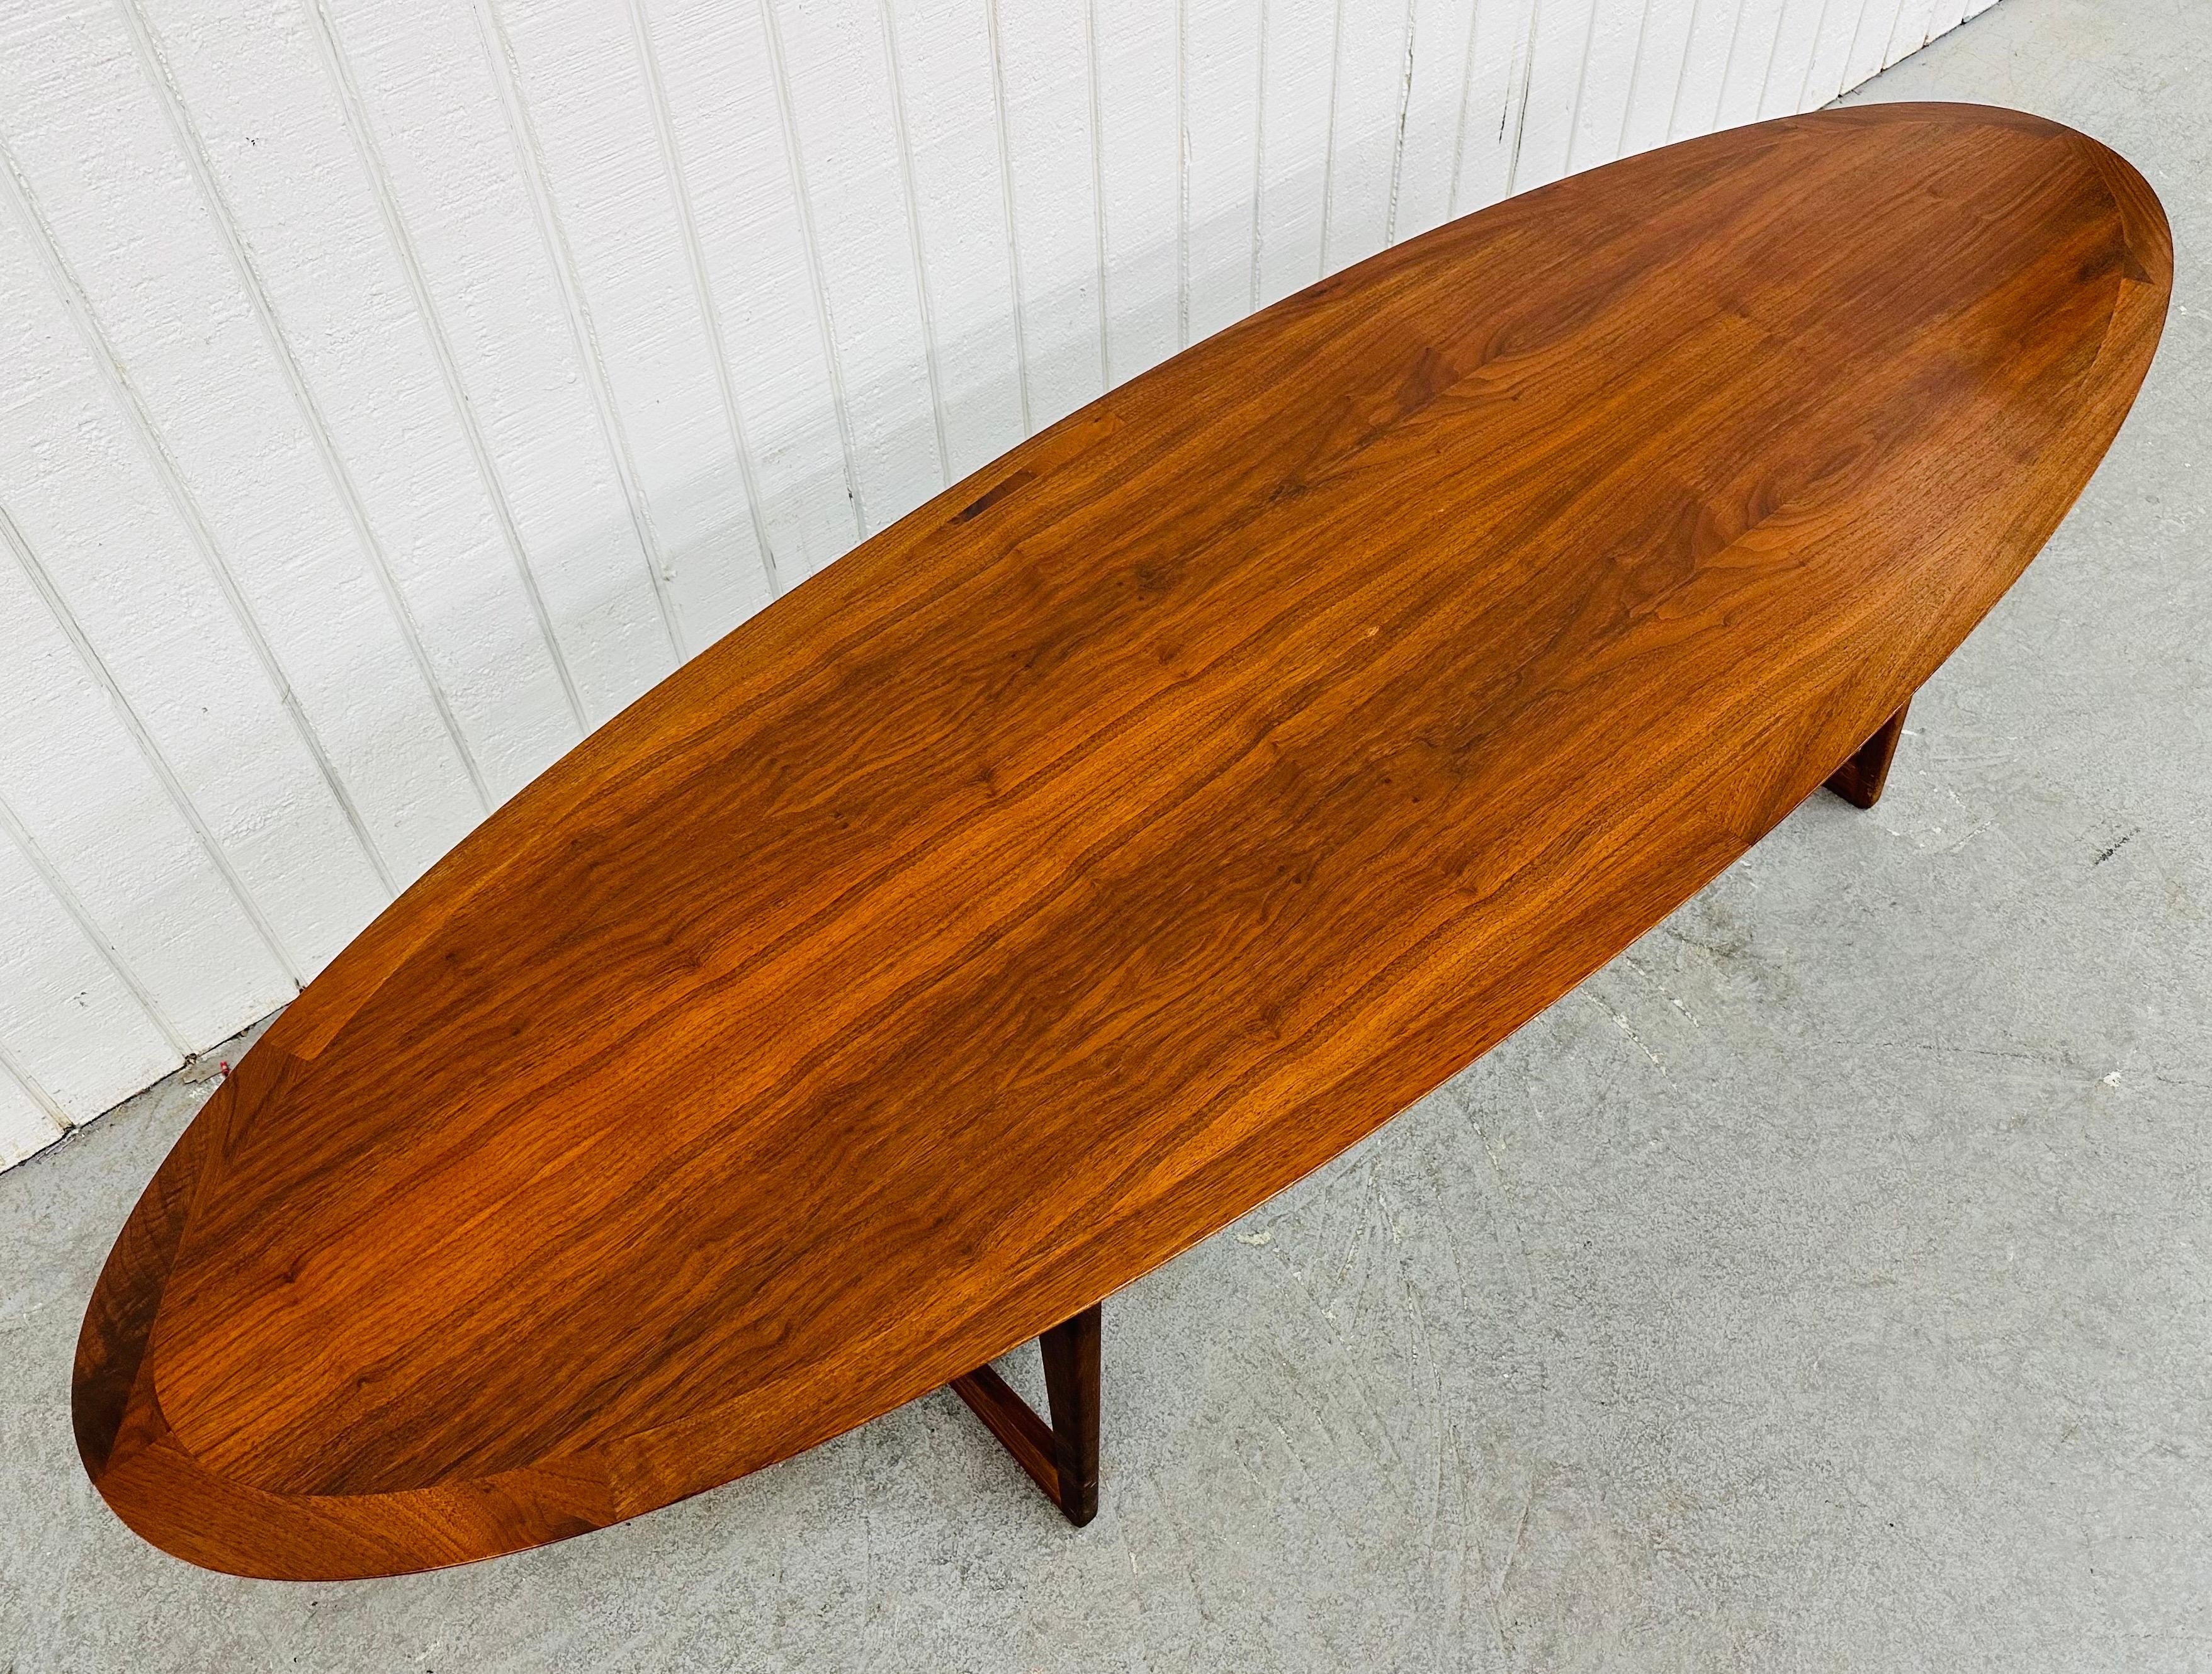 This listing is for a Mid-Century Danish Modern Moreddi Walnut Surfboard Coffee Table. Featuring an extra long oval surfboard style top, modern pedestal style legs, and a beautiful walnut finish. This is an exceptional combination of quality and